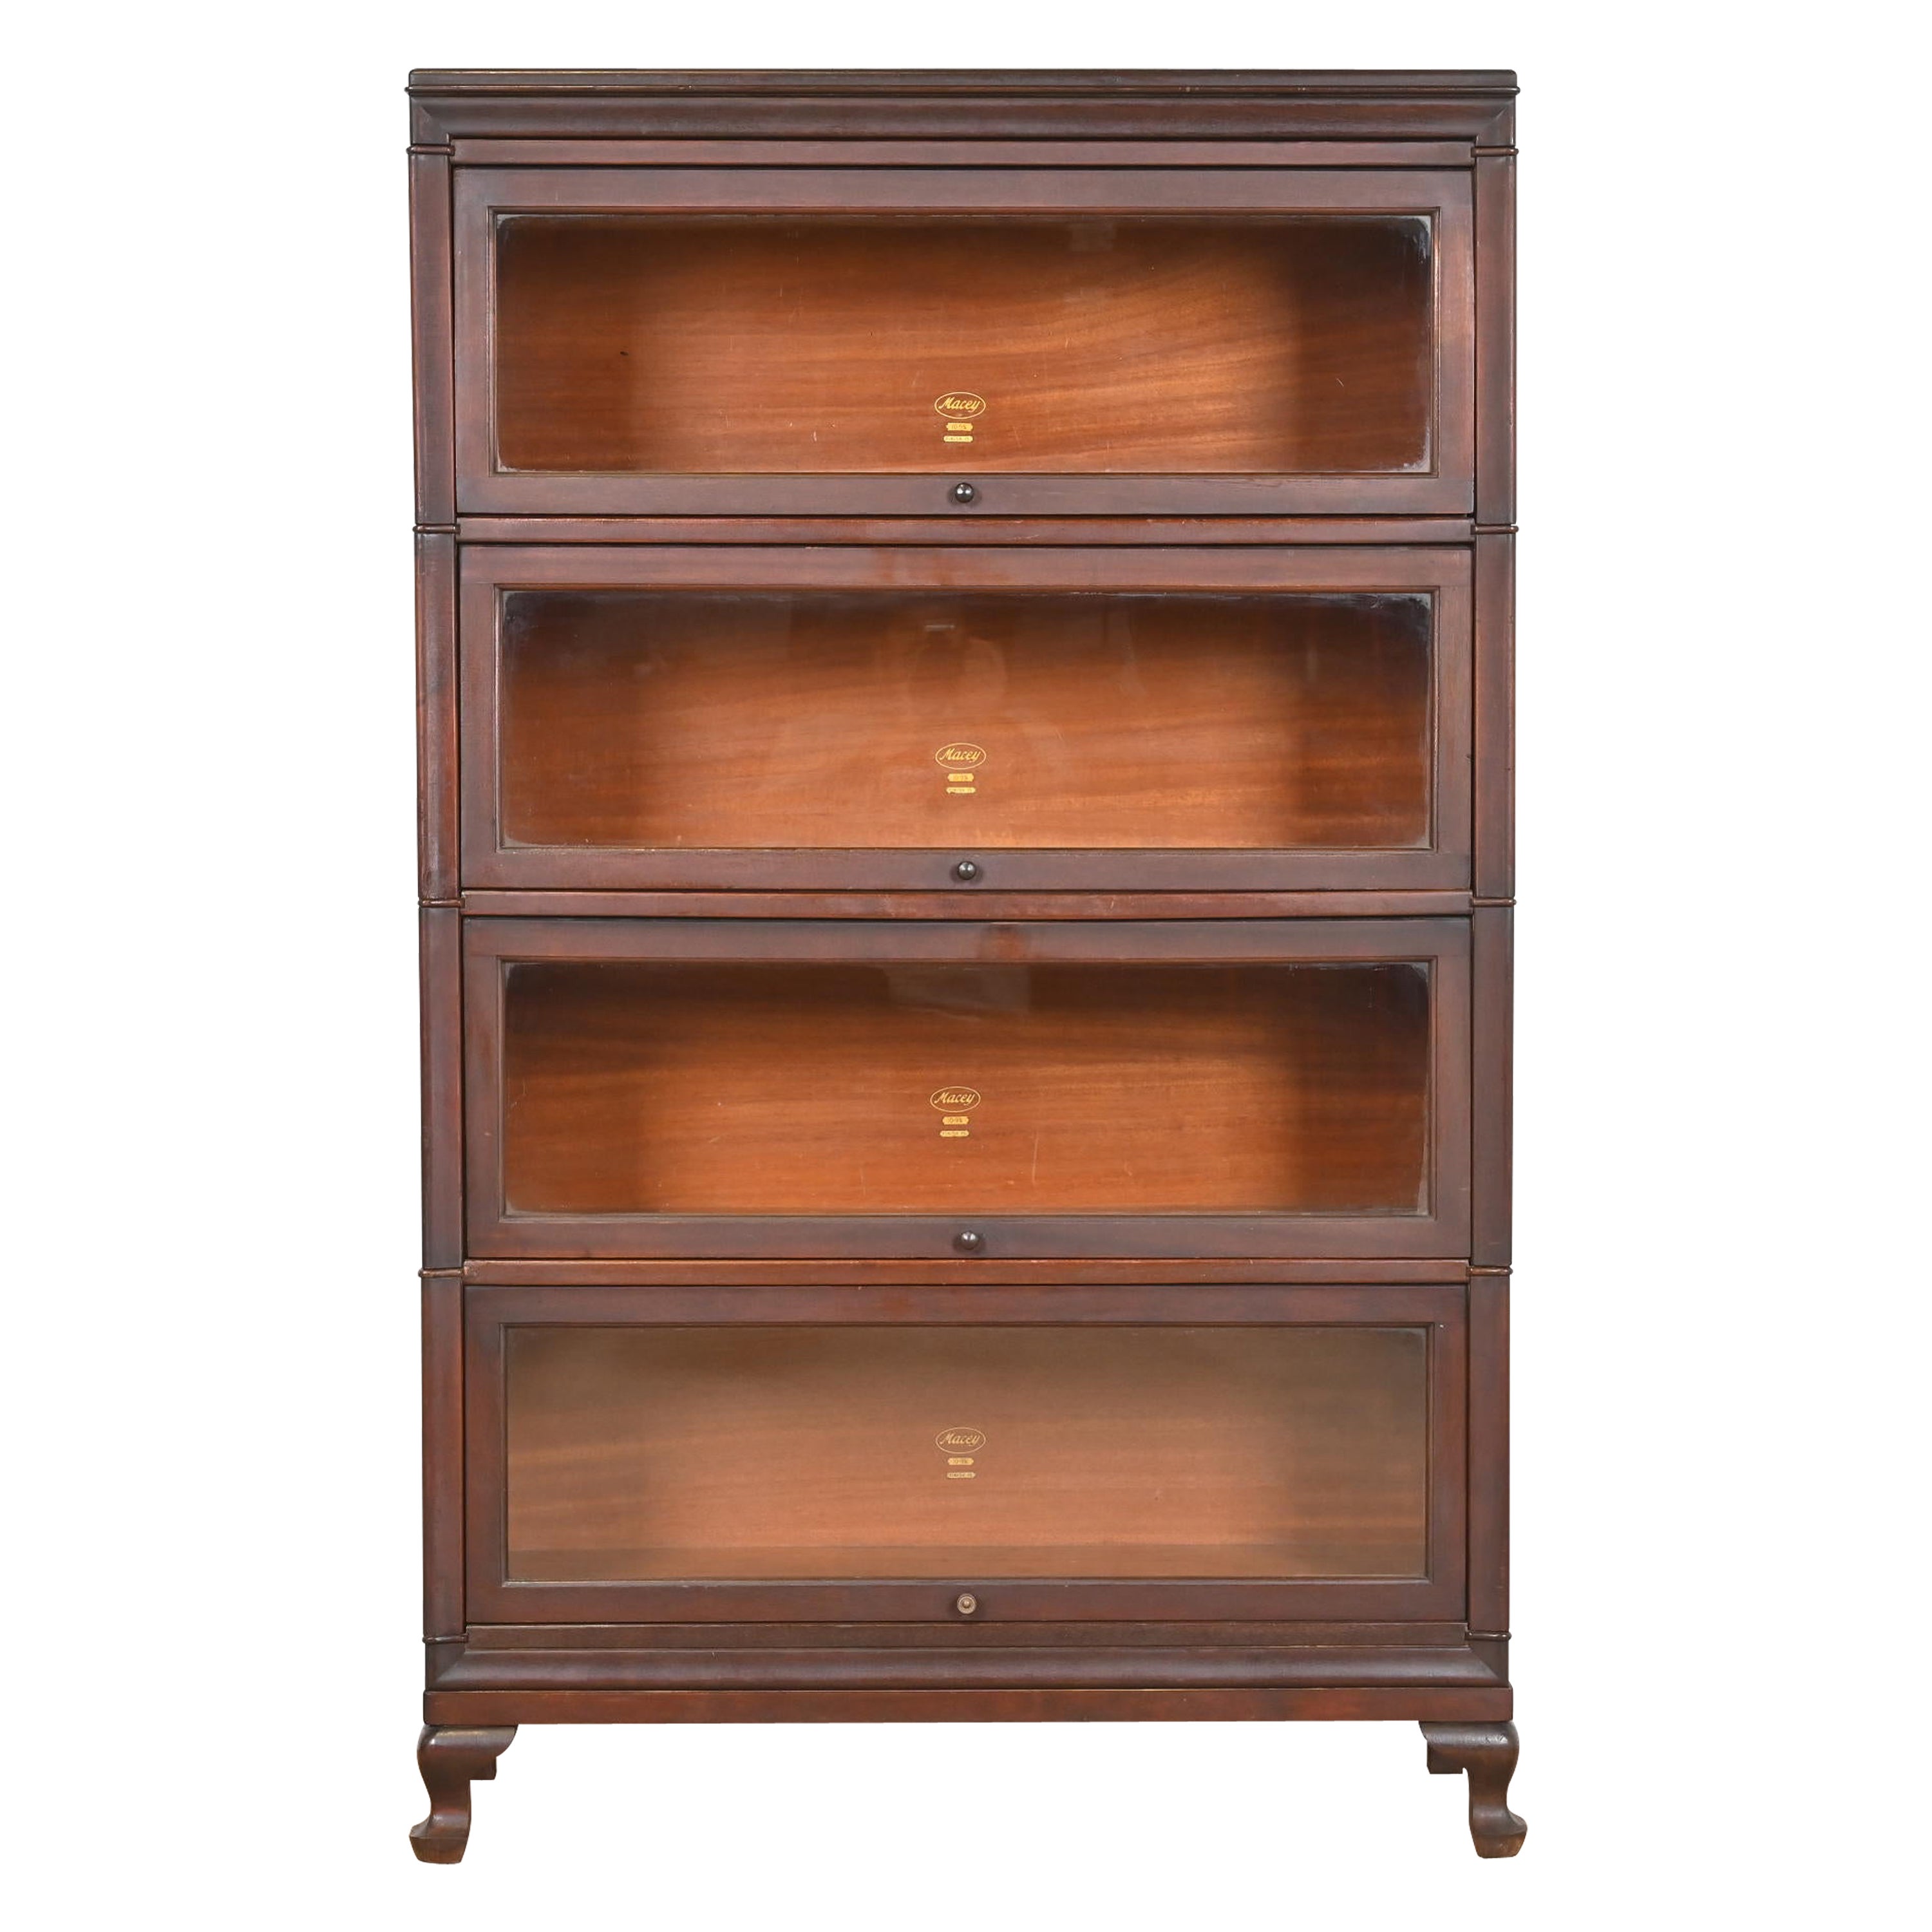 Antique Arts & Crafts Mahogany Four-Stack Barrister Bookcase by Macey, 1920s For Sale